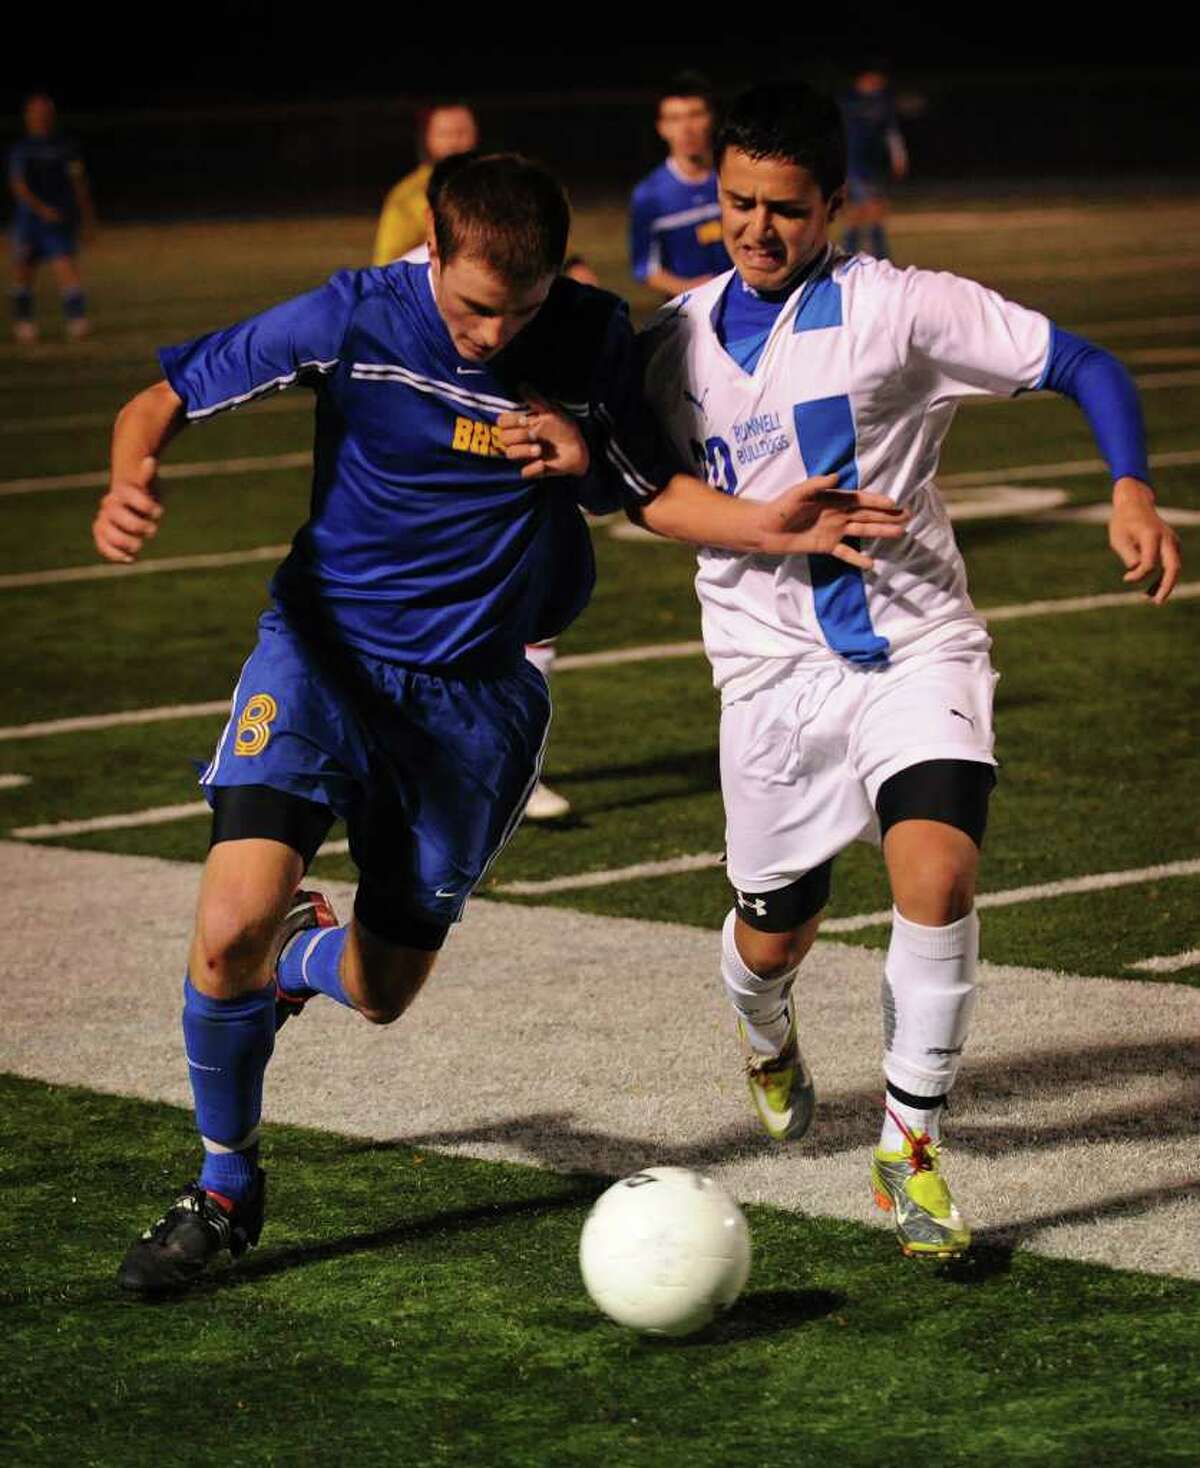 Brookfield's Collin Burke, left, battles for the ball with Bunnell's Christopher Carniero during their Class state tournament matchup at Bunnell High School in Stratford on Monday, November 15, 2010. Bunnell won the game on penalty kicks 5-3.